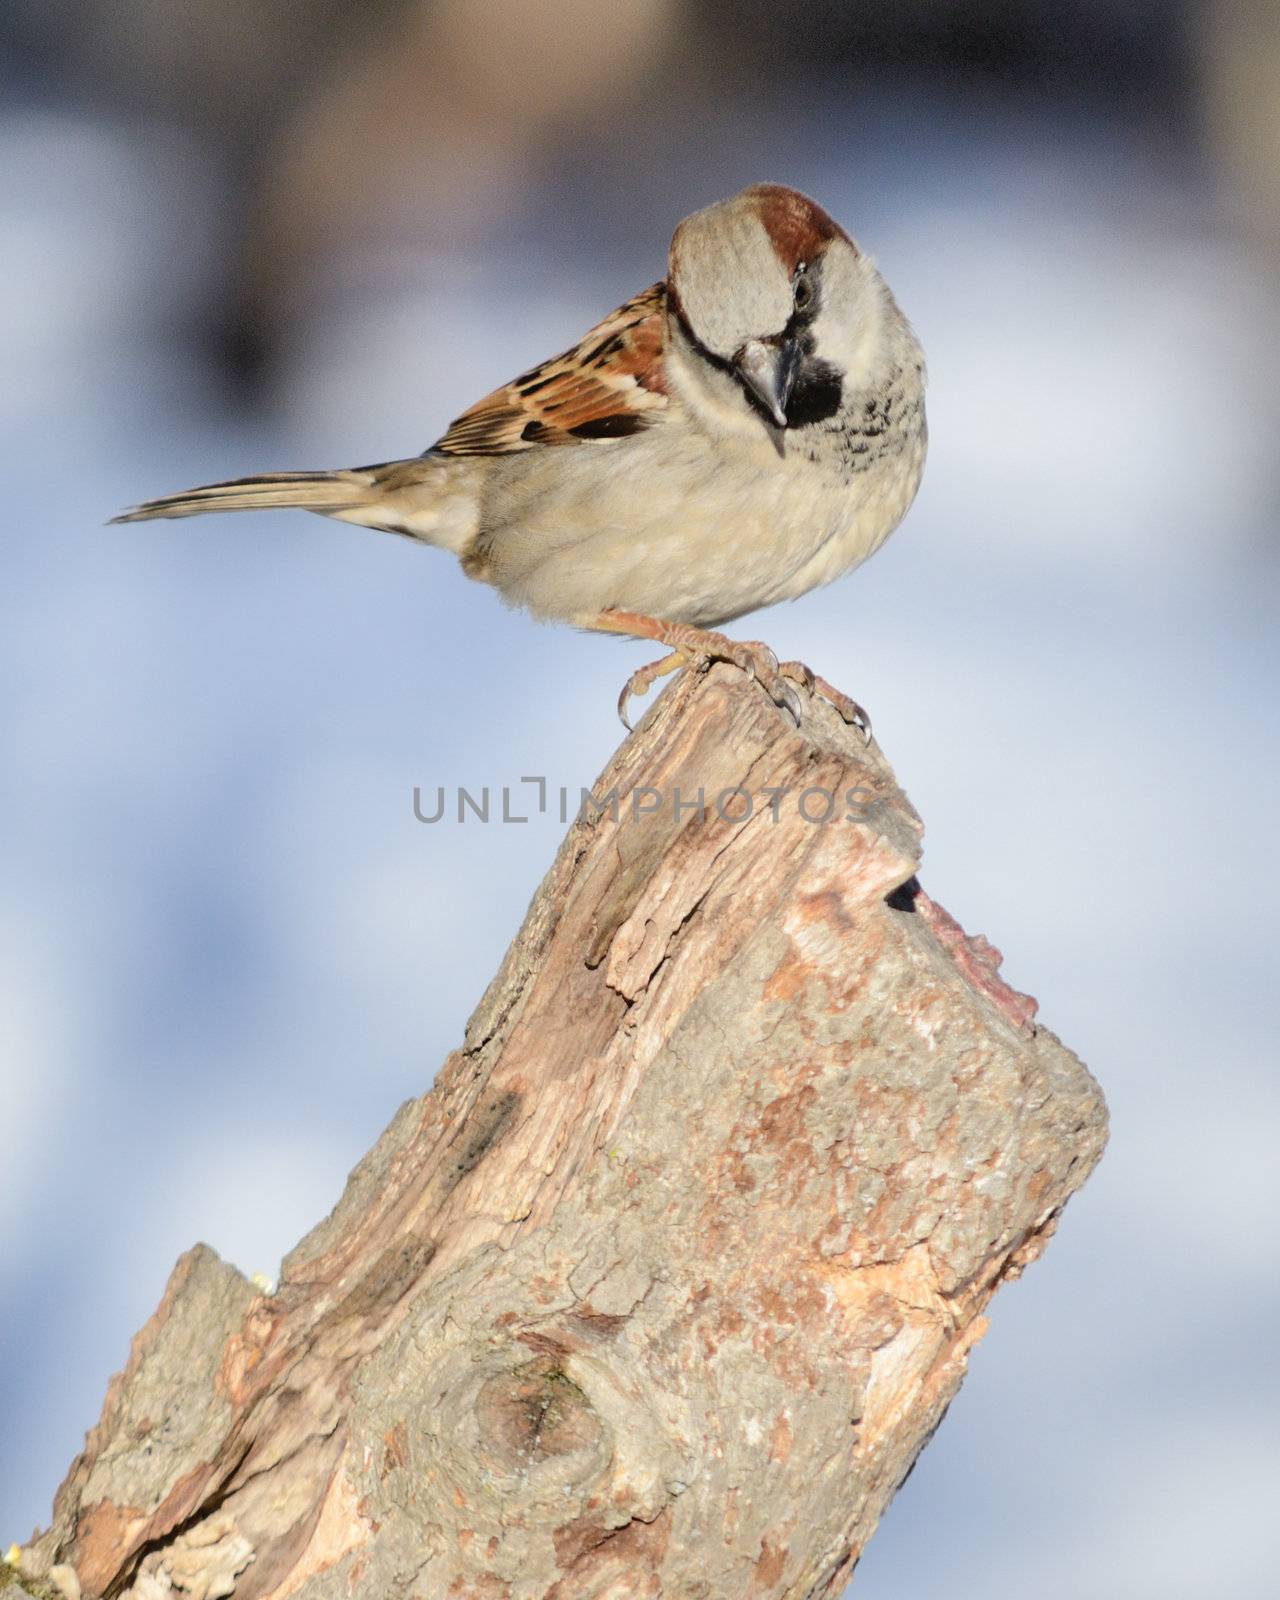 A house sparrow perched on a tree stump.